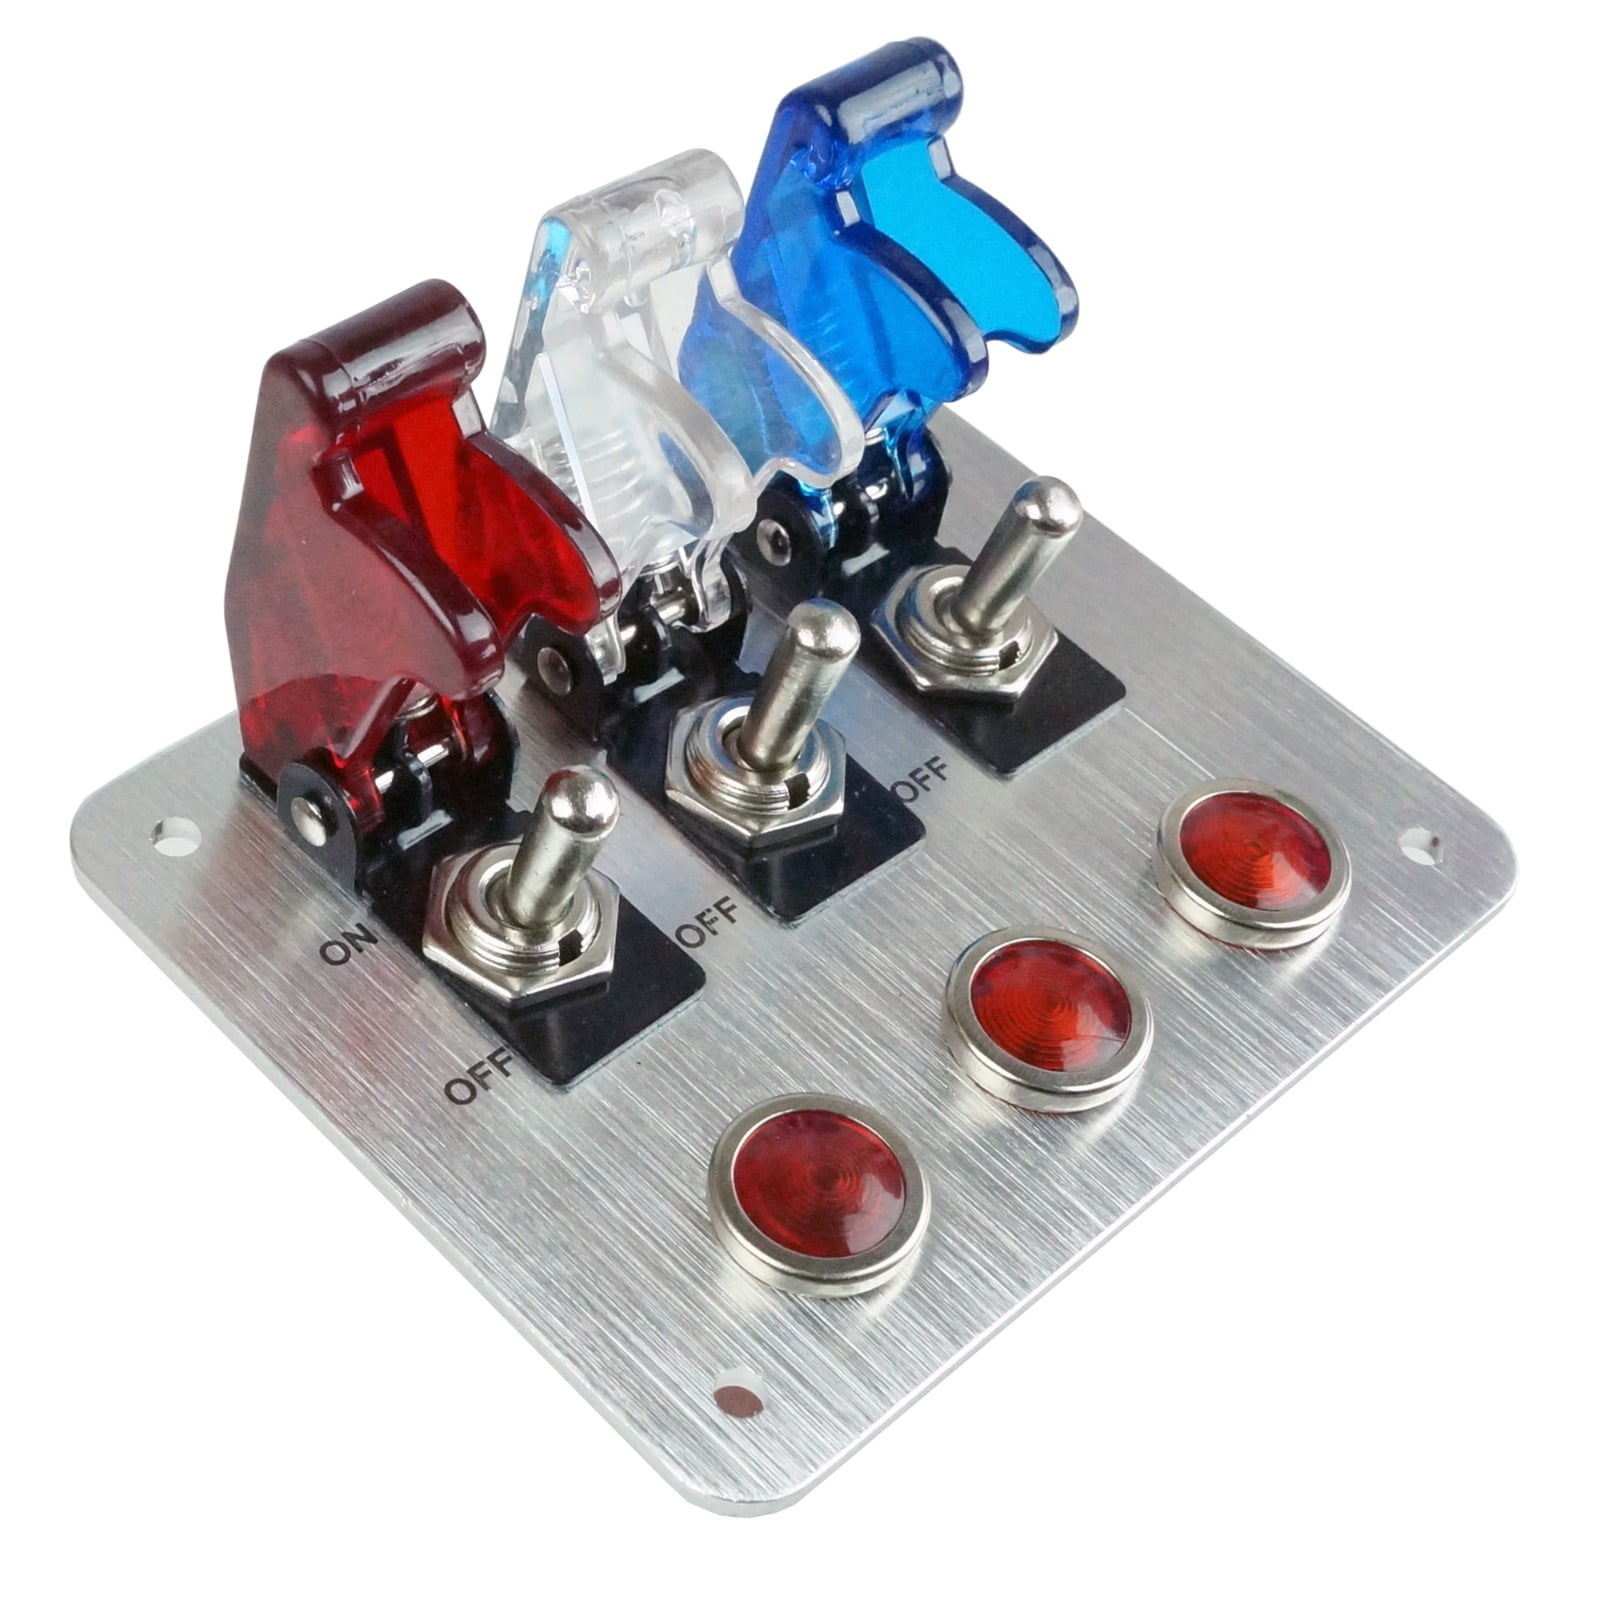 Art Plates Brand Double Gang Toggle Switch/Wall Plate DNA